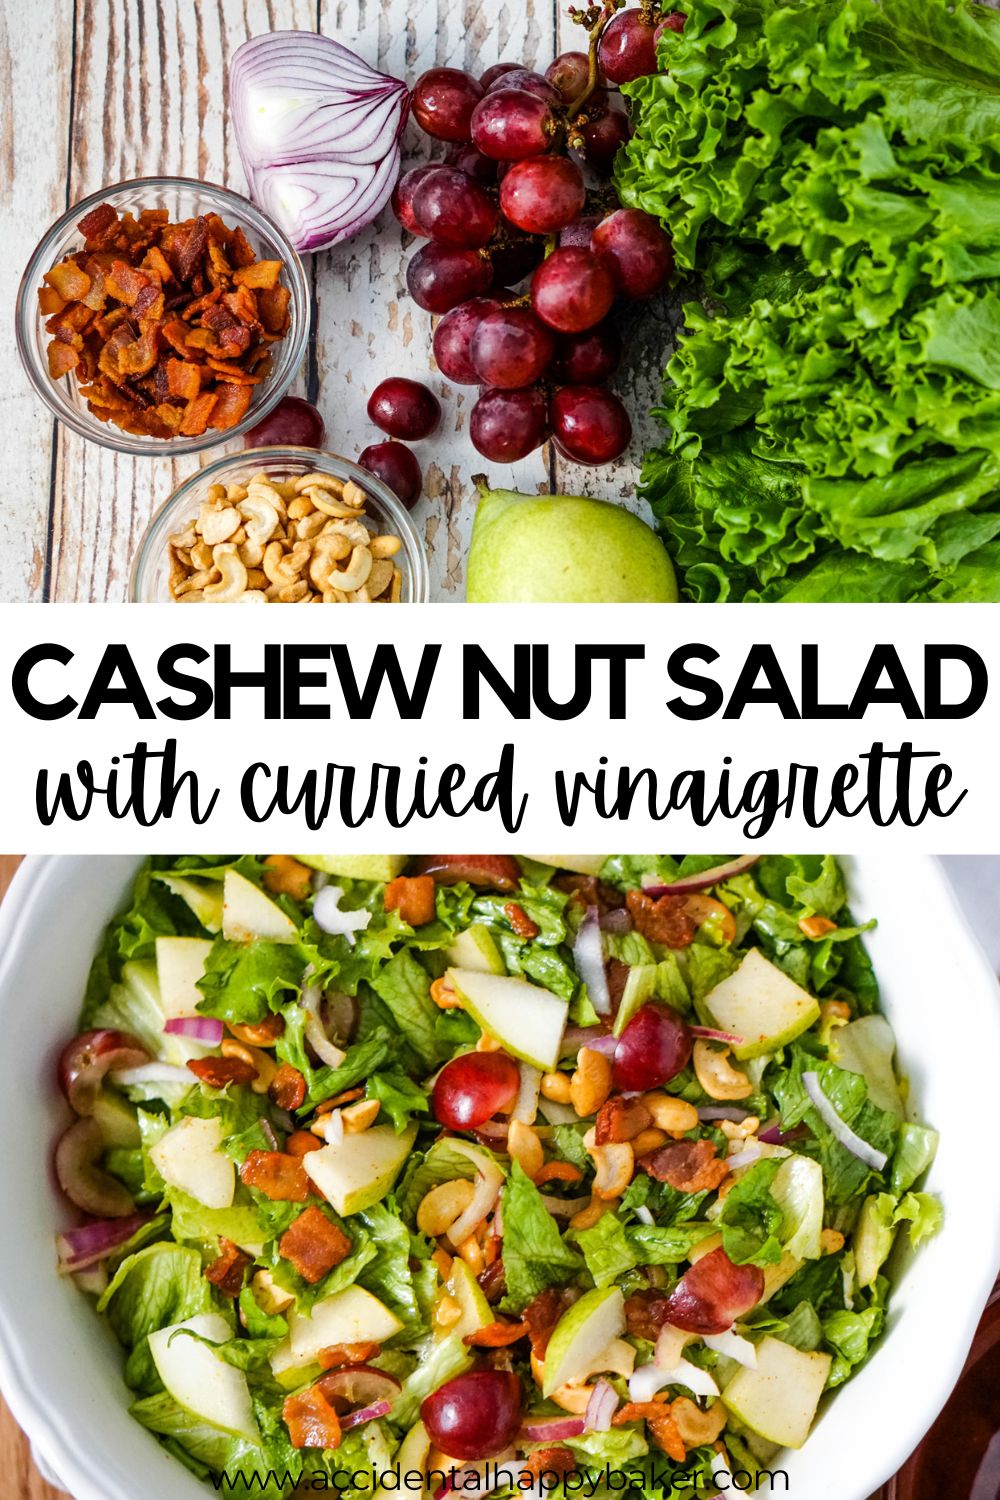 This isn't your typical side salad.  Cashew Nut Salad combines cashews, bacon, pears and grapes with mixed greens and a snappy curried vinaigrette for an easy salad recipe that will liven up any meal!